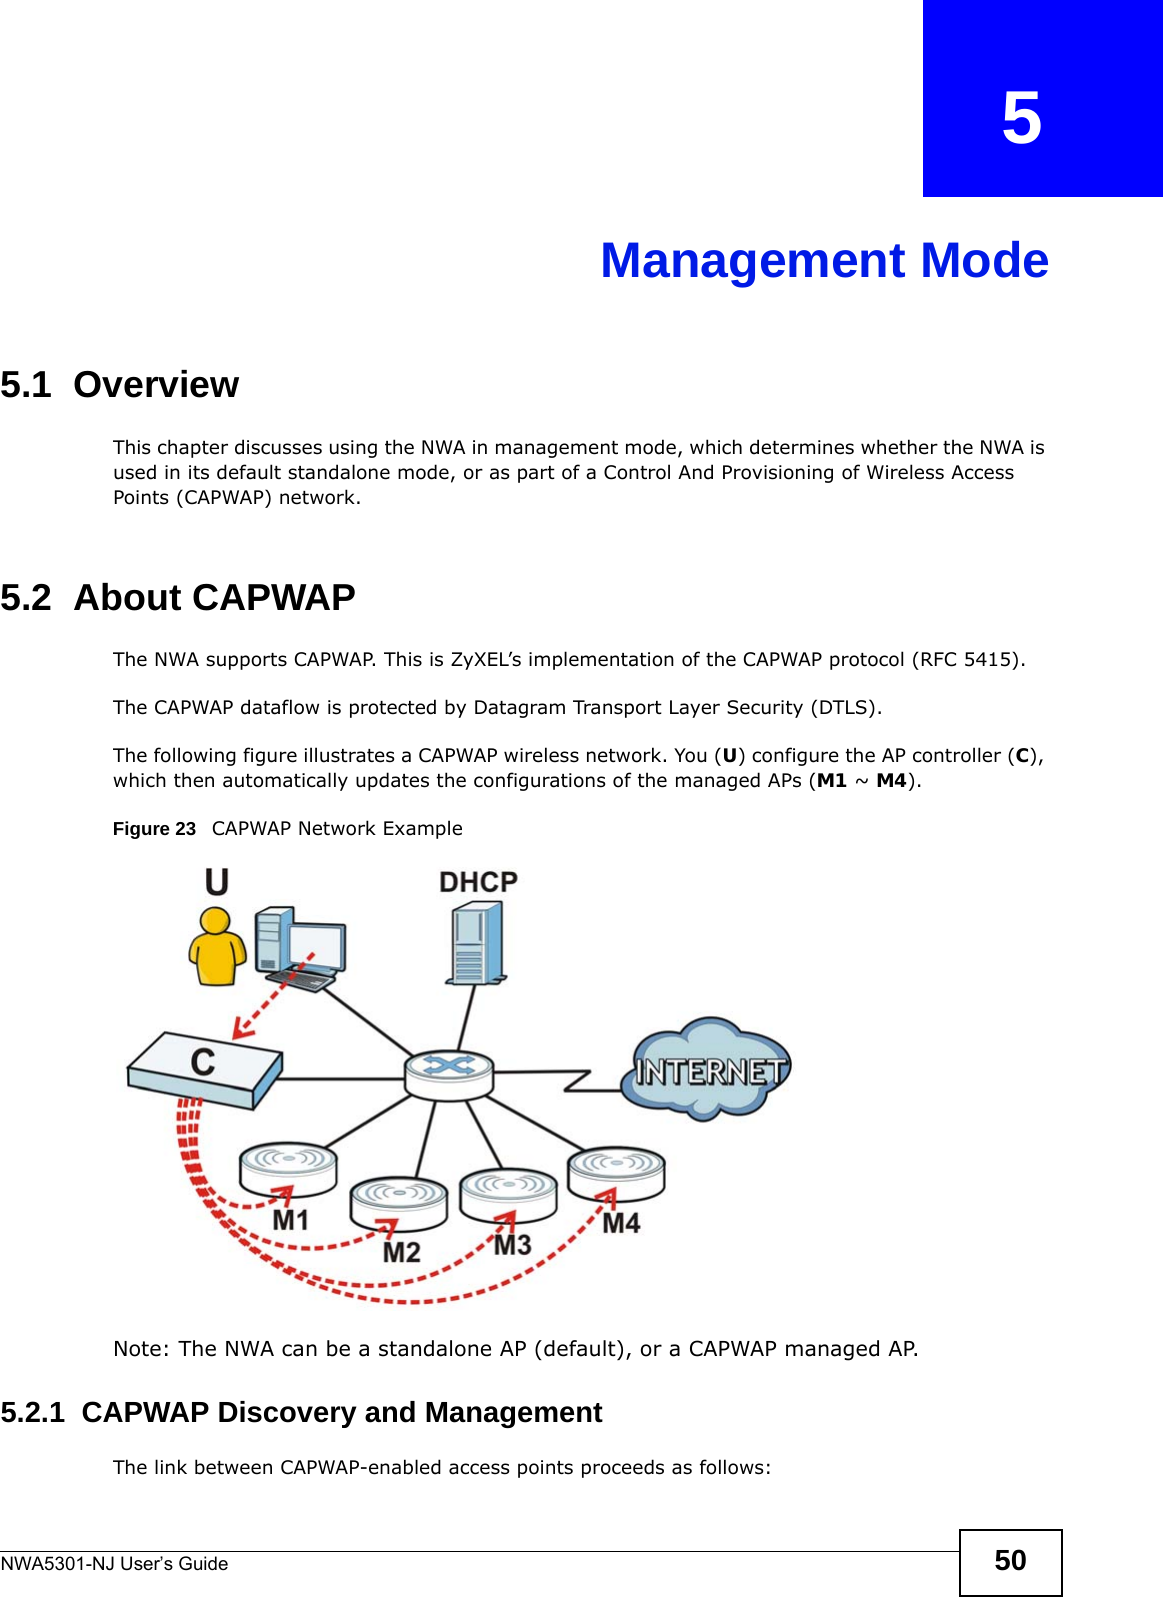 NWA5301-NJ User’s Guide 50CHAPTER   5Management Mode5.1  OverviewThis chapter discusses using the NWA in management mode, which determines whether the NWA is used in its default standalone mode, or as part of a Control And Provisioning of Wireless Access Points (CAPWAP) network. 5.2  About CAPWAPThe NWA supports CAPWAP. This is ZyXEL’s implementation of the CAPWAP protocol (RFC 5415). The CAPWAP dataflow is protected by Datagram Transport Layer Security (DTLS).The following figure illustrates a CAPWAP wireless network. You (U) configure the AP controller (C), which then automatically updates the configurations of the managed APs (M1 ~ M4). Figure 23   CAPWAP Network ExampleNote: The NWA can be a standalone AP (default), or a CAPWAP managed AP.5.2.1  CAPWAP Discovery and ManagementThe link between CAPWAP-enabled access points proceeds as follows: